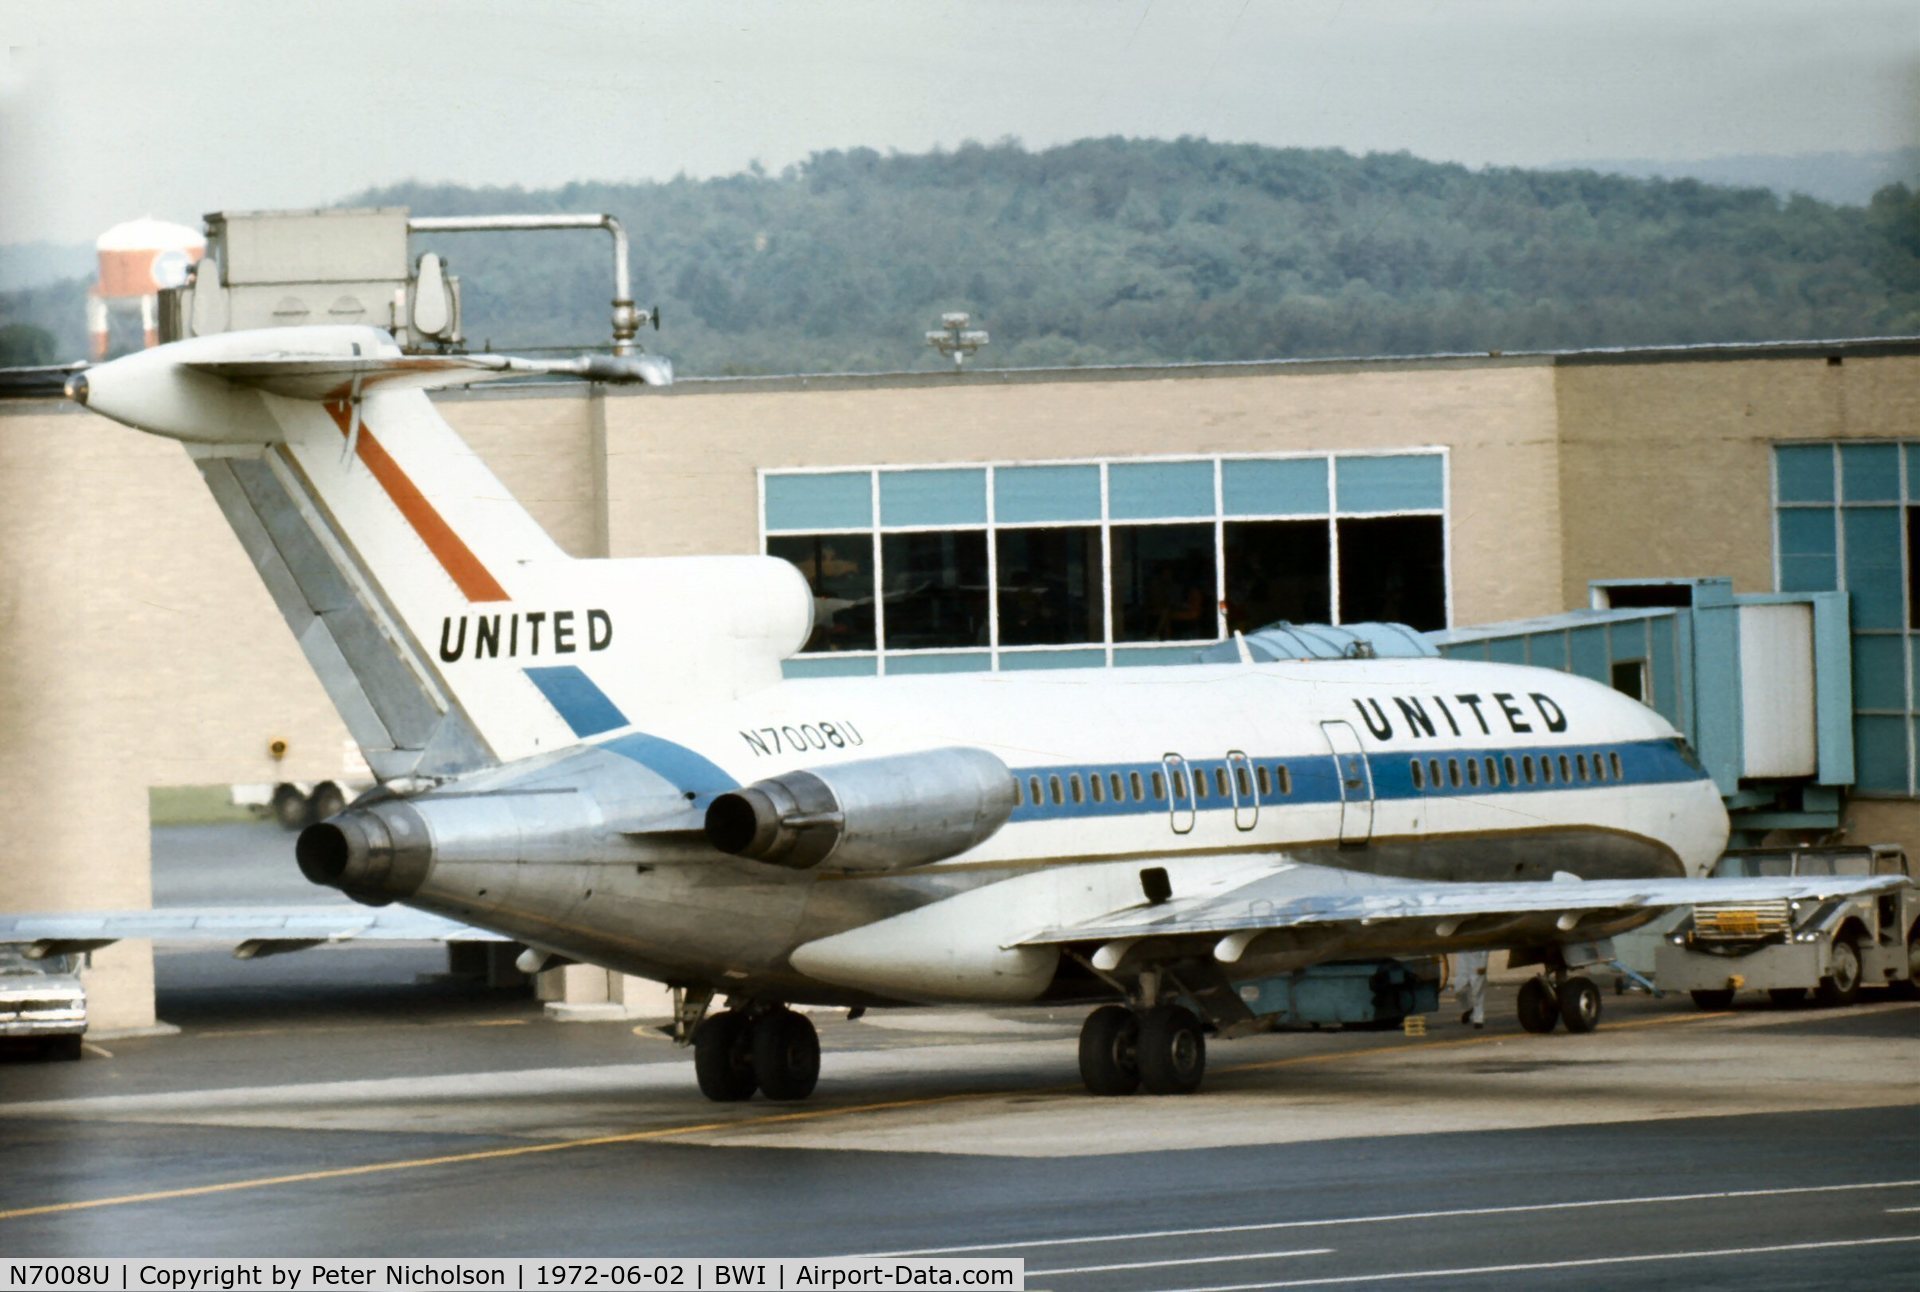 N7008U, Boeing 727-22 C/N 18300, In service with United Airlines  in the summer of 1972 at what was then known as Friendship Airport.